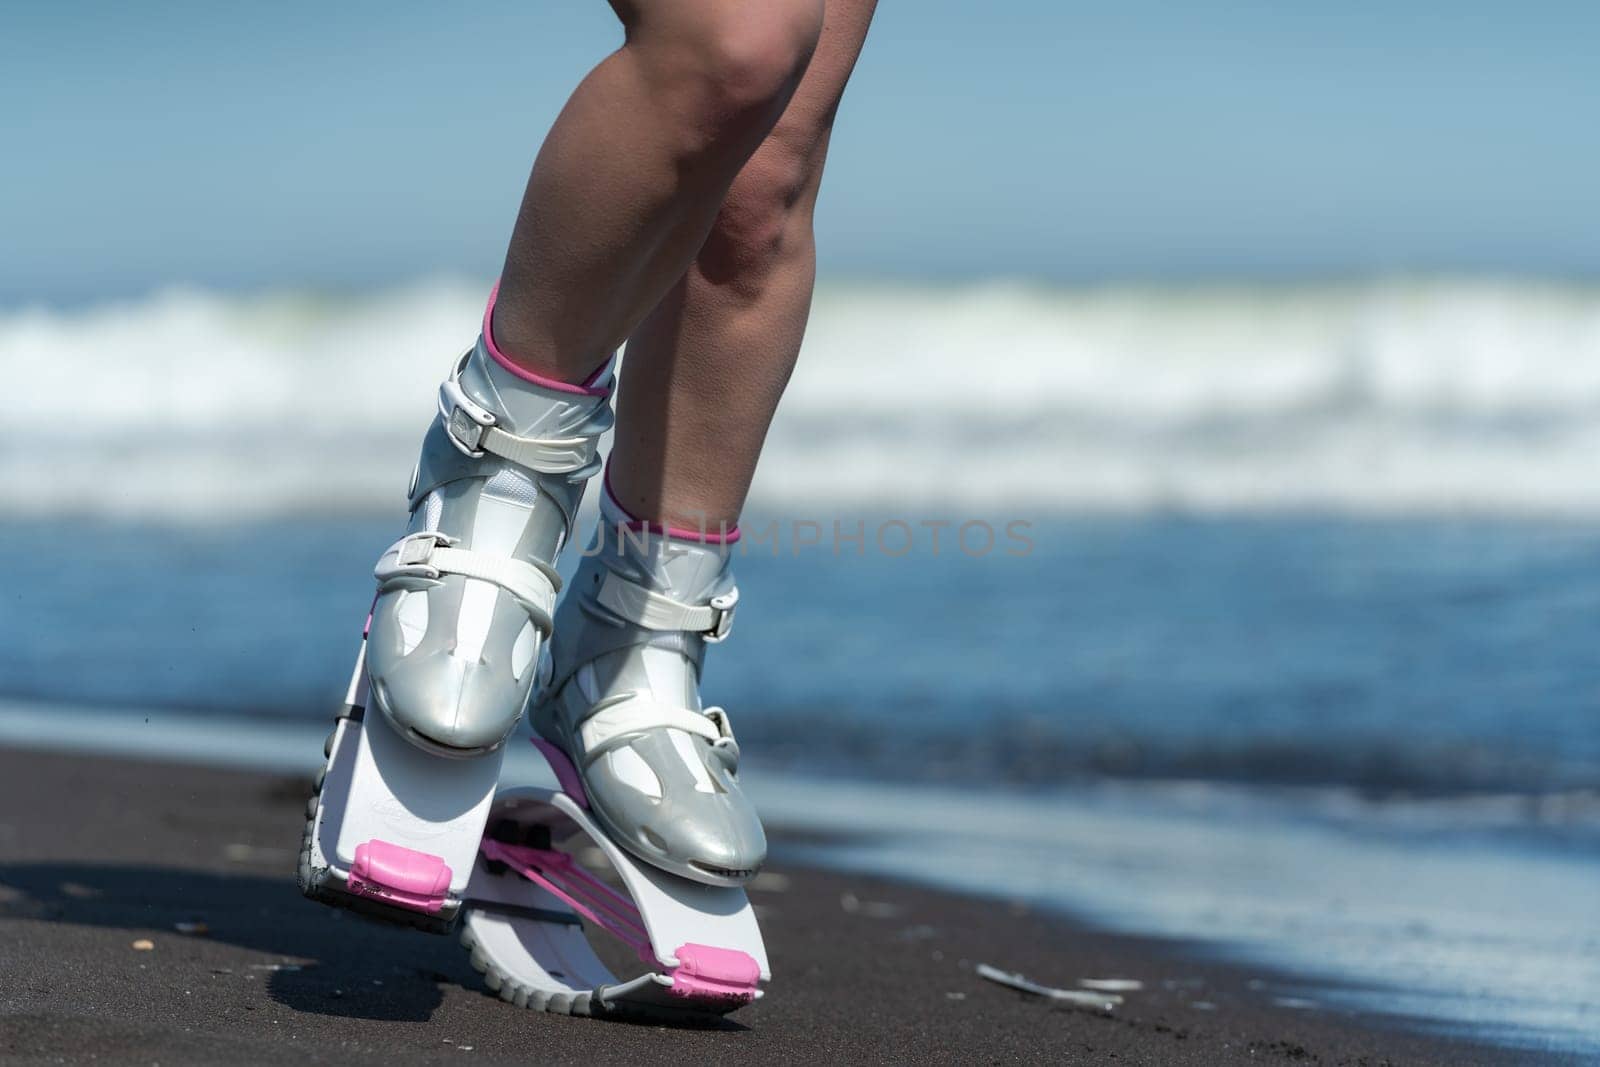 KAMCHATKA, RUSSIA - JUNE 15, 2022: Female legs in sports Kangoo Jumps boots jumping and running on black sandy beach during fitness training session outdoors on seashore on background of ocean waves